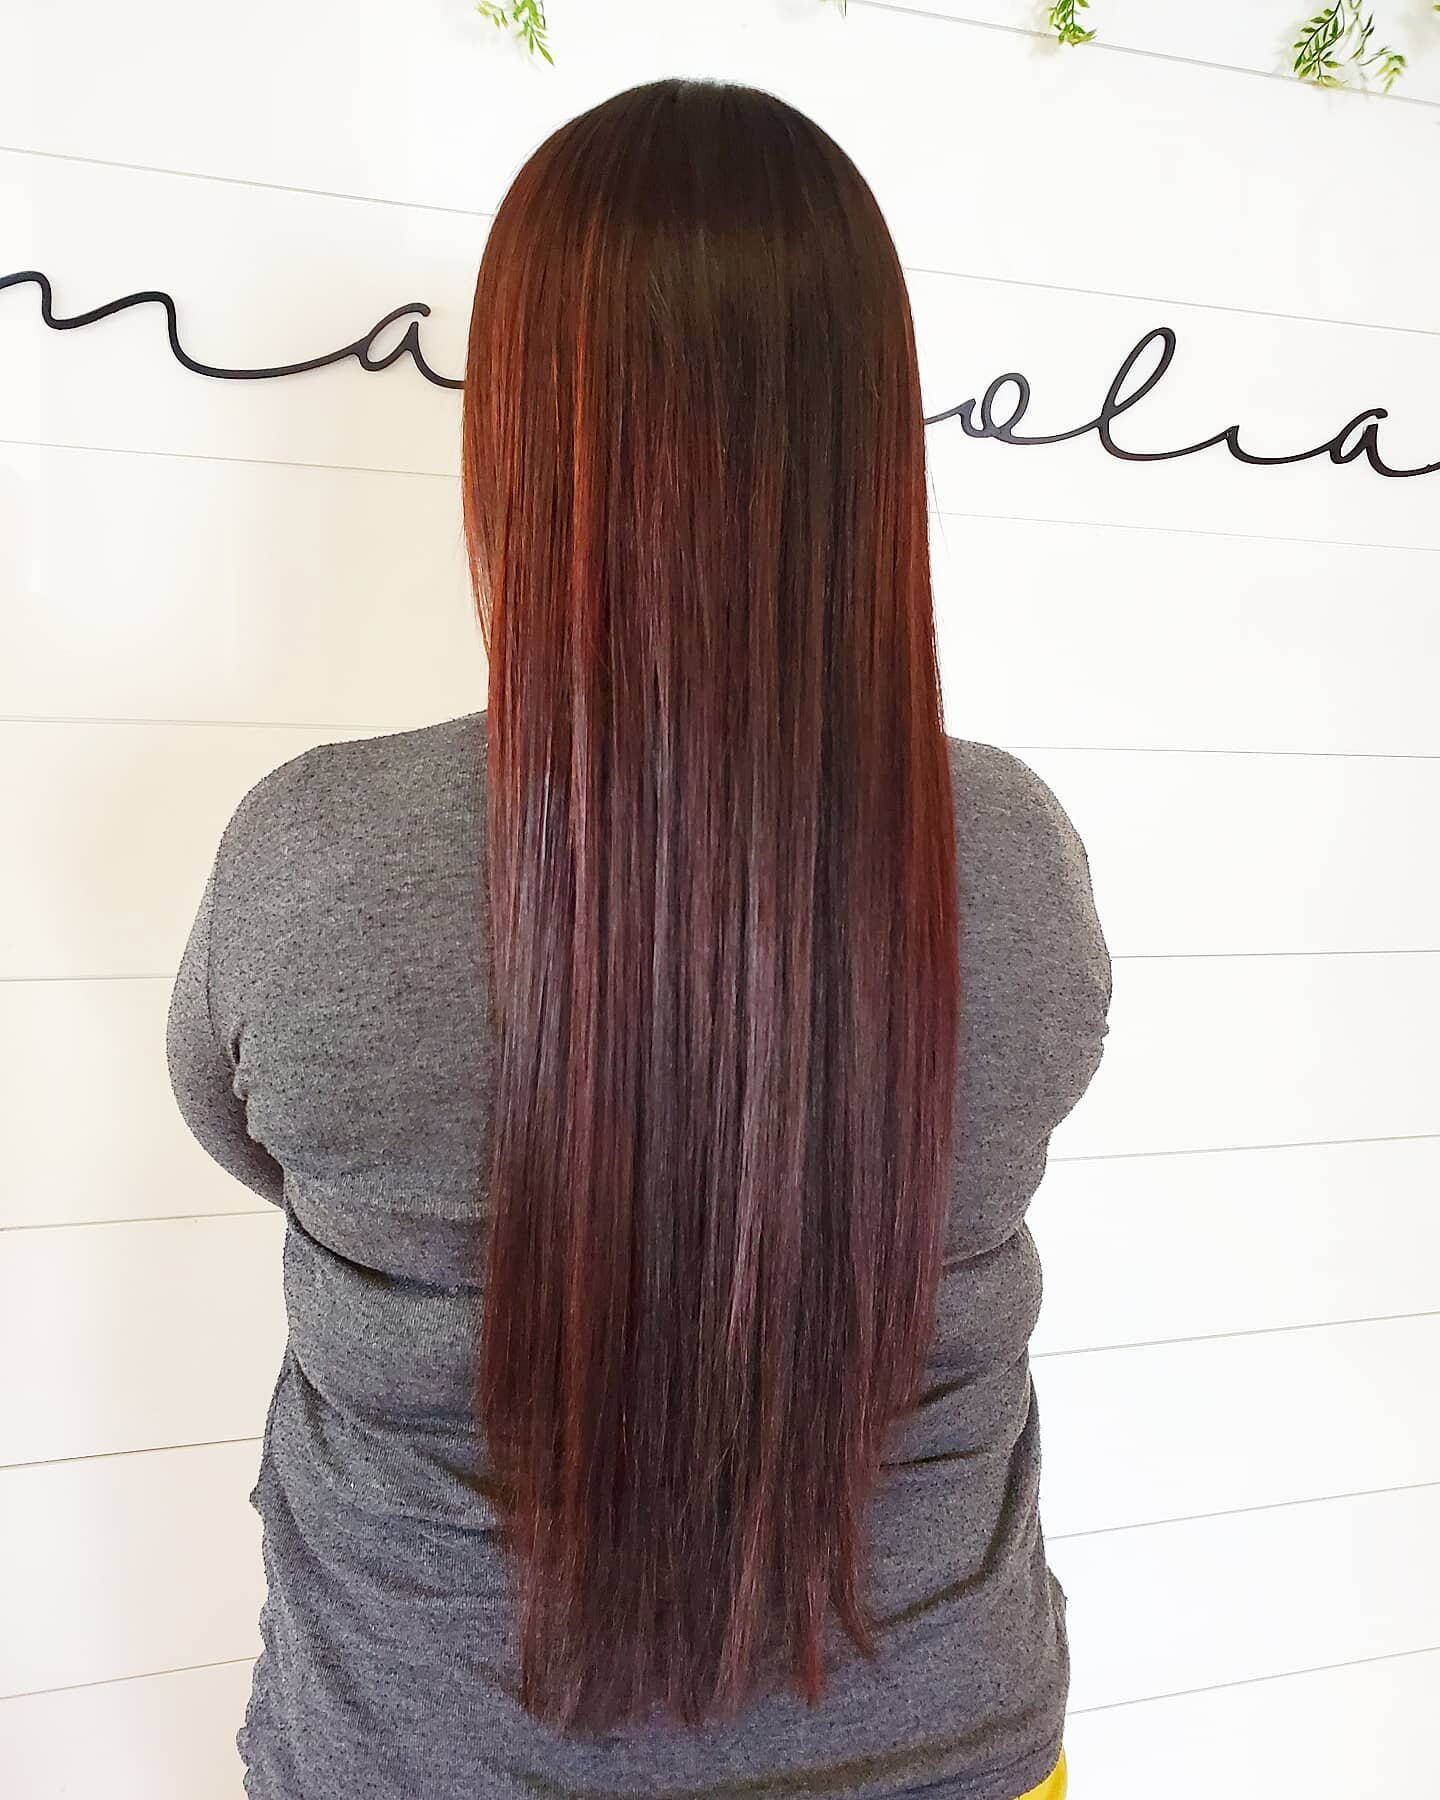 Hey CHERRY COLA 🍒 🥰⁣
Redkin 5RV over her existing balayage  was the perfect fix for this cutie! ⁣
⁣
⁣
⁣
⁣
⁣
#newlook #redkin #magnoliarouge #colorist #slcsalon #cherrycola #longhair #brazilianblowout #cherryontop #utahdayspa #beyoutiful